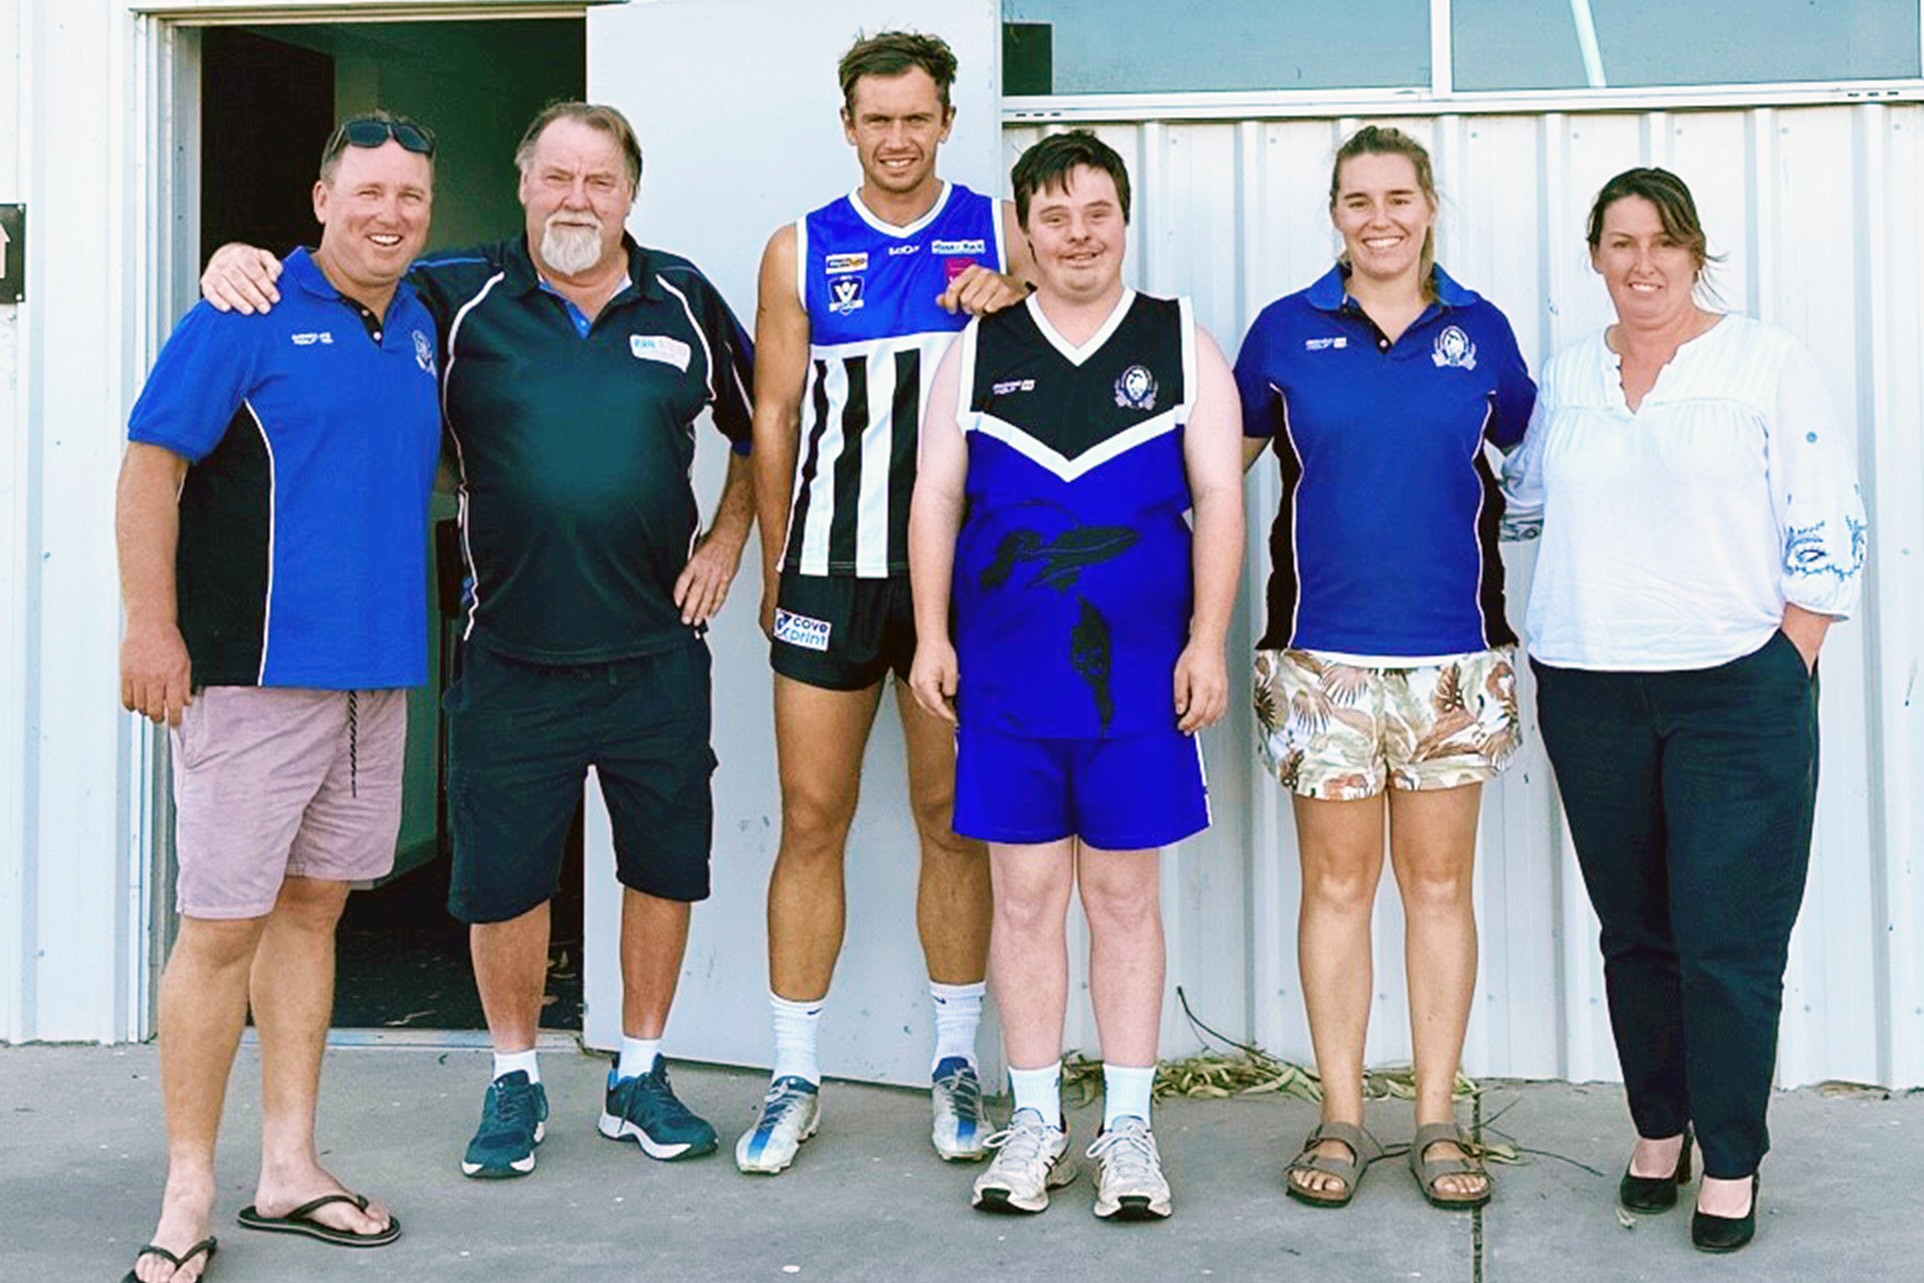 Scott Arnold (Club President), Mal Coutts (Rural Outreach Worker), Tim McKenzie (Senior Football Coach), Lachie Young (Club Legend), Sheridan Petering (Senior Netball Coach) and Jo Grant (Rural Outreach Coordinator).